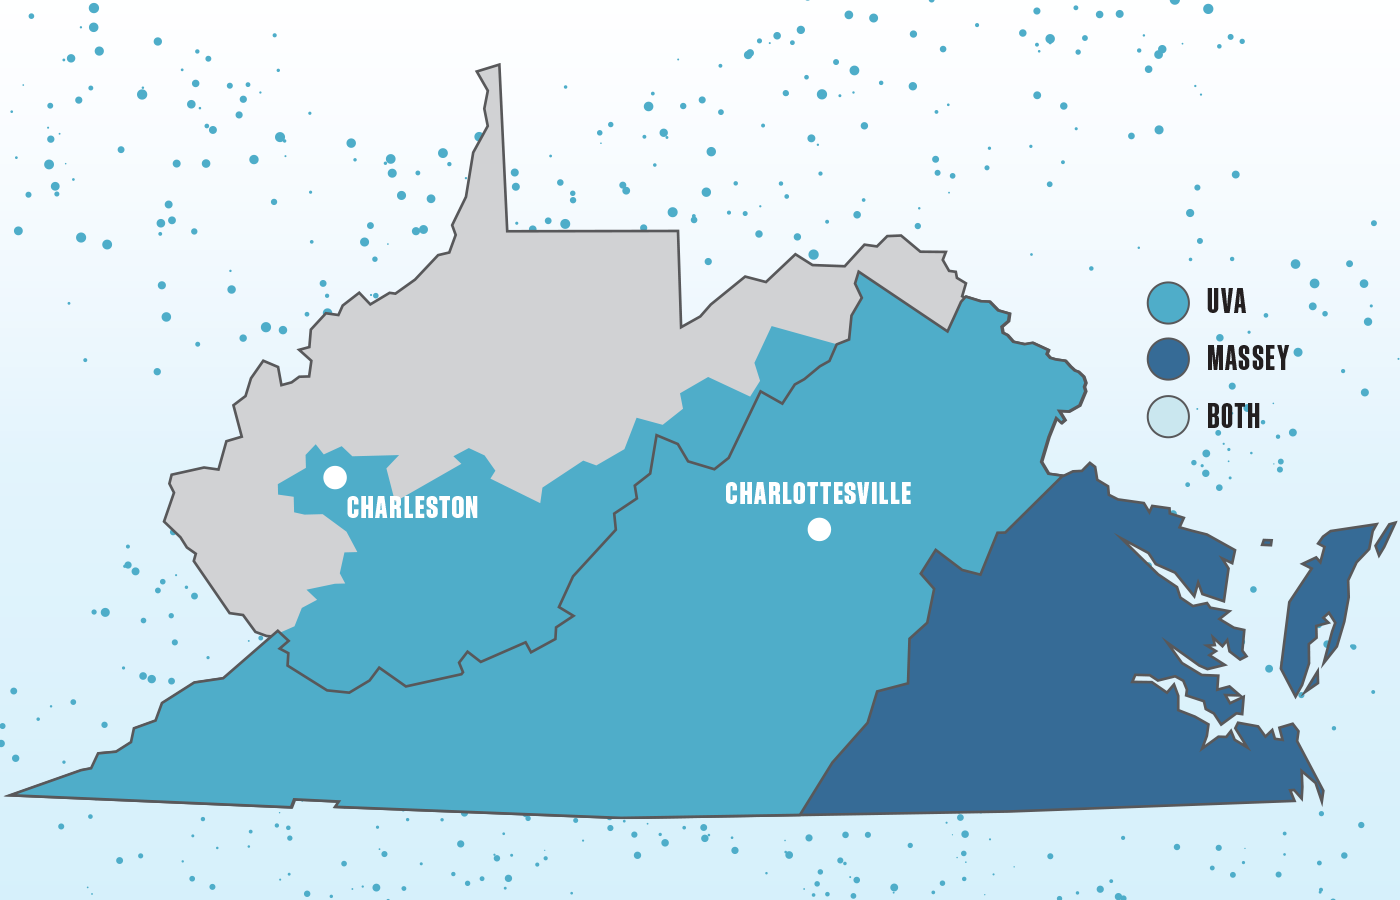 Map of Virginia and West Virginia, with areas shaded that are served by UVA and VCU cancer centers